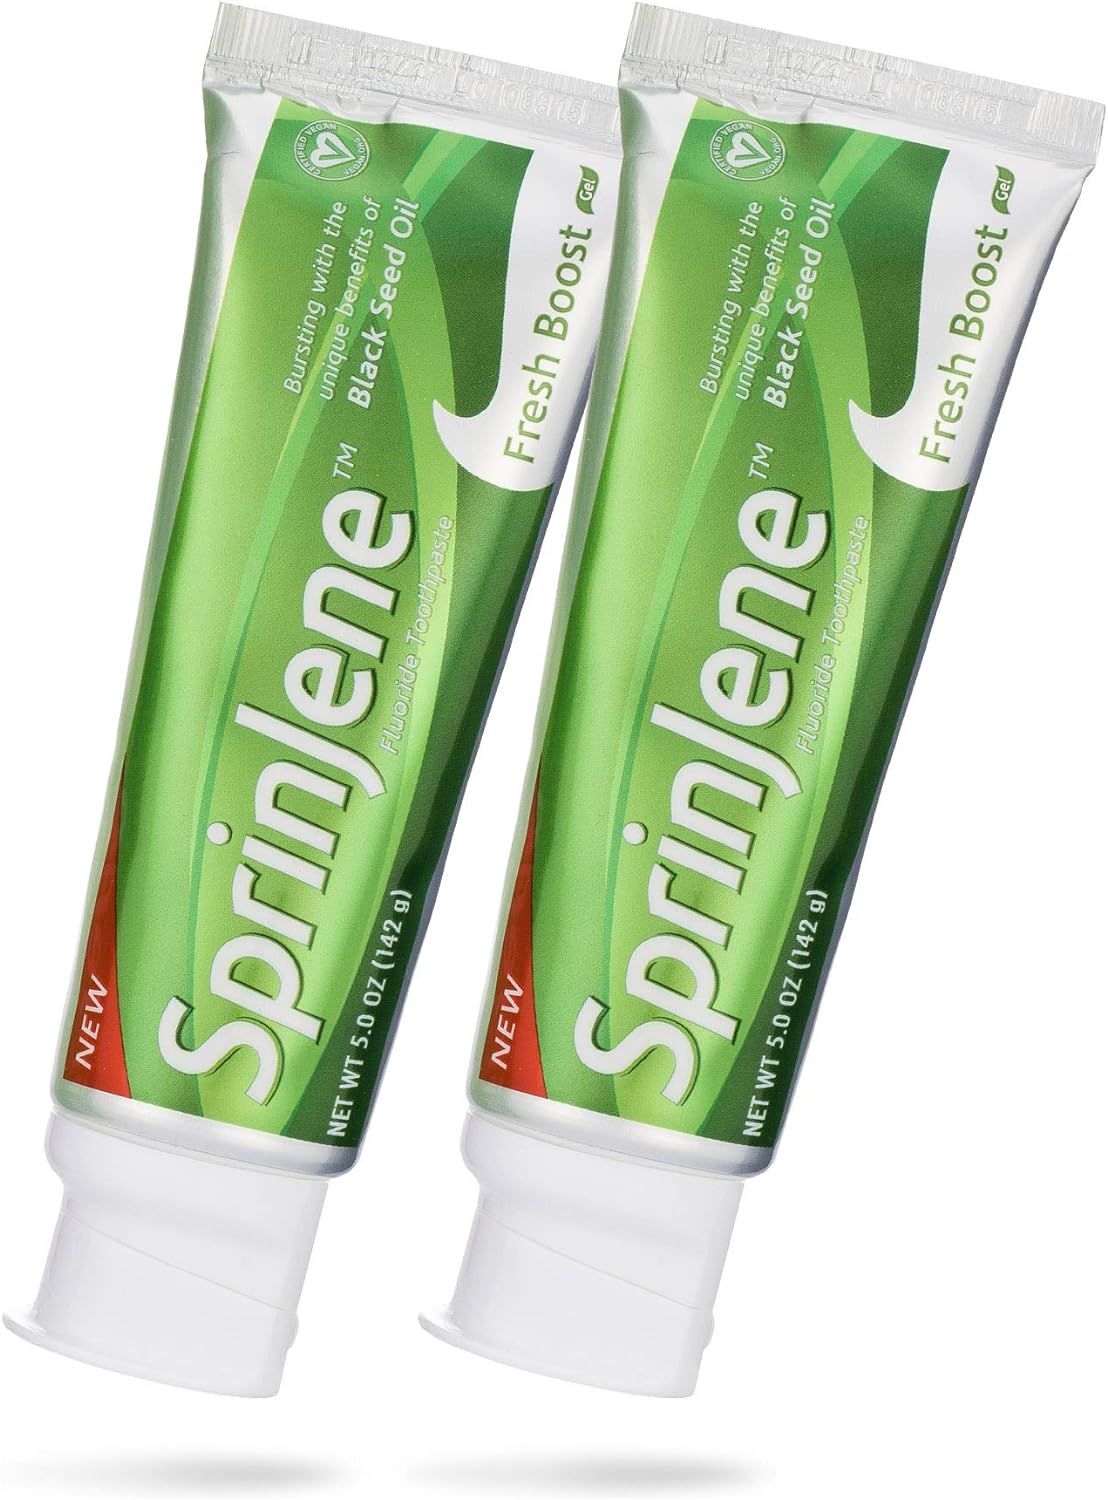 SprinJene Fluoride Toothpaste with Patented Black Seed Oil and Zinc - Certified Vegan, Cruelty-Free, Gluten-Free, Kosher, Halal, Natural Teeth Whitening Toothpaste 2 Pack (Fresh Boost)